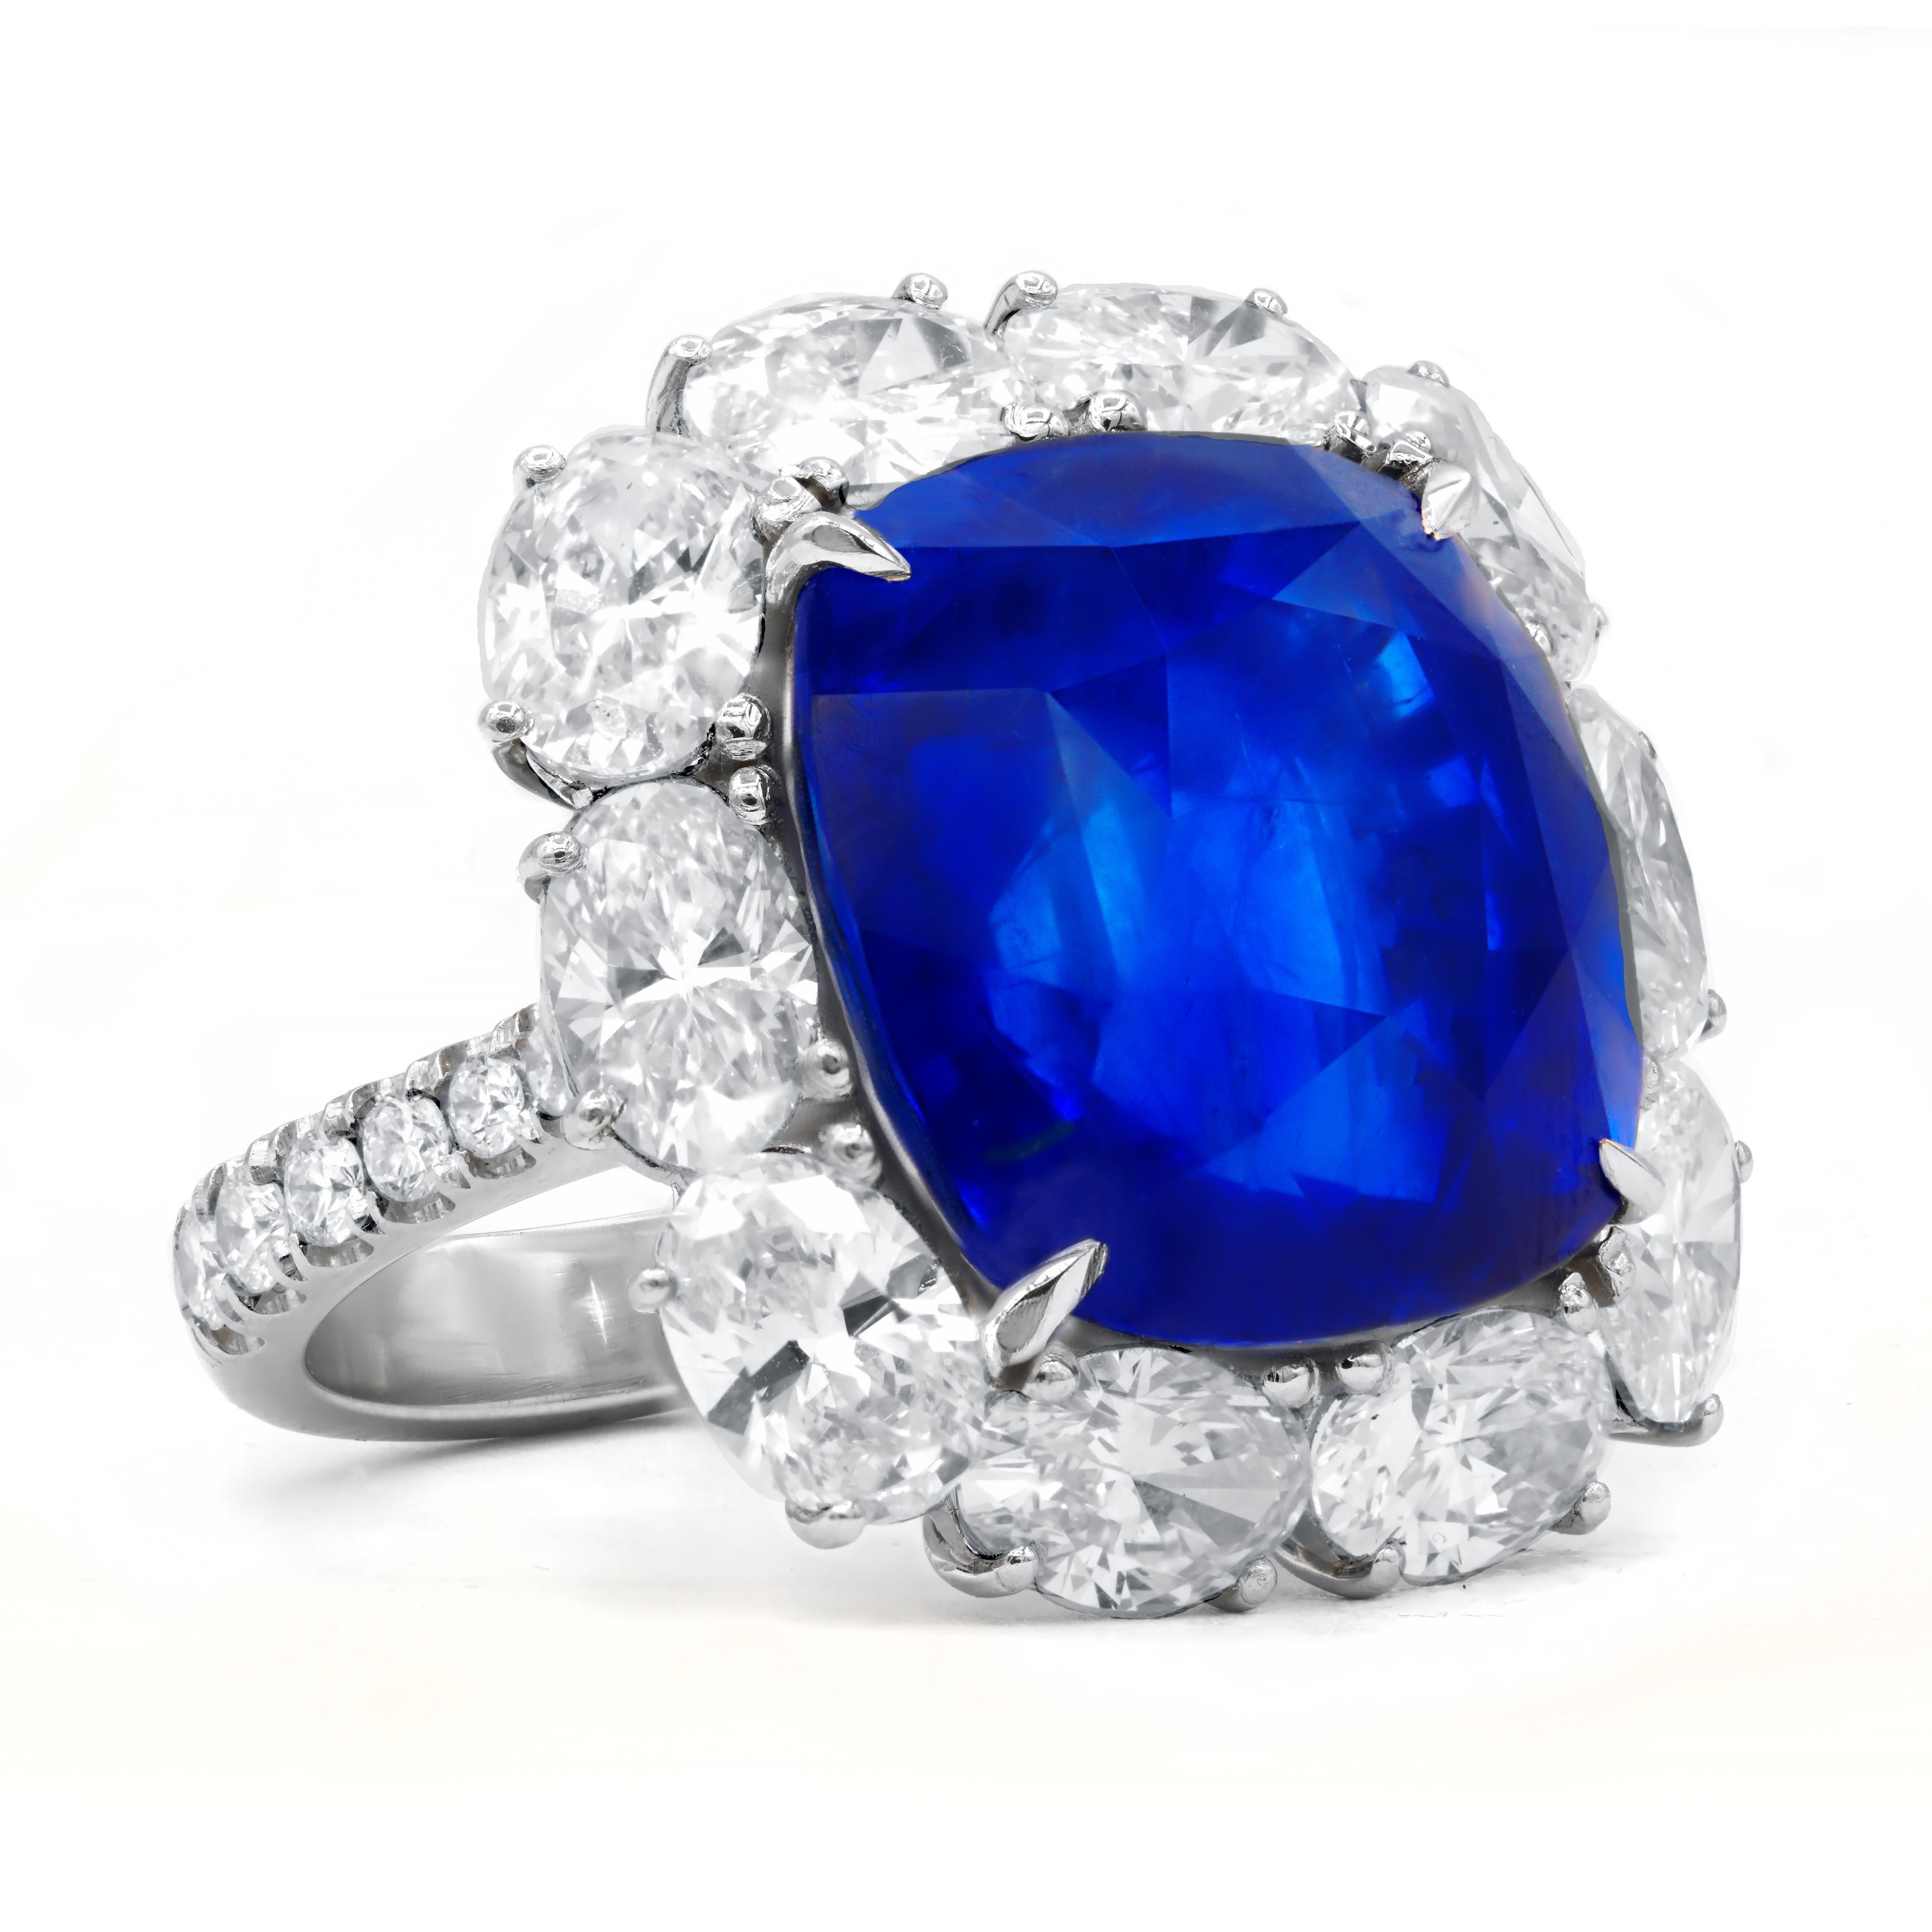 Platinum sapphire and diamond ring featuring a GRS certified 24.38 ct natural cushion cut blue sapphire with 5.70 cts tw of diamonds surrounding the center gem and going 3/4 around the band
Diana M. is a leading supplier of top-quality fine jewelry